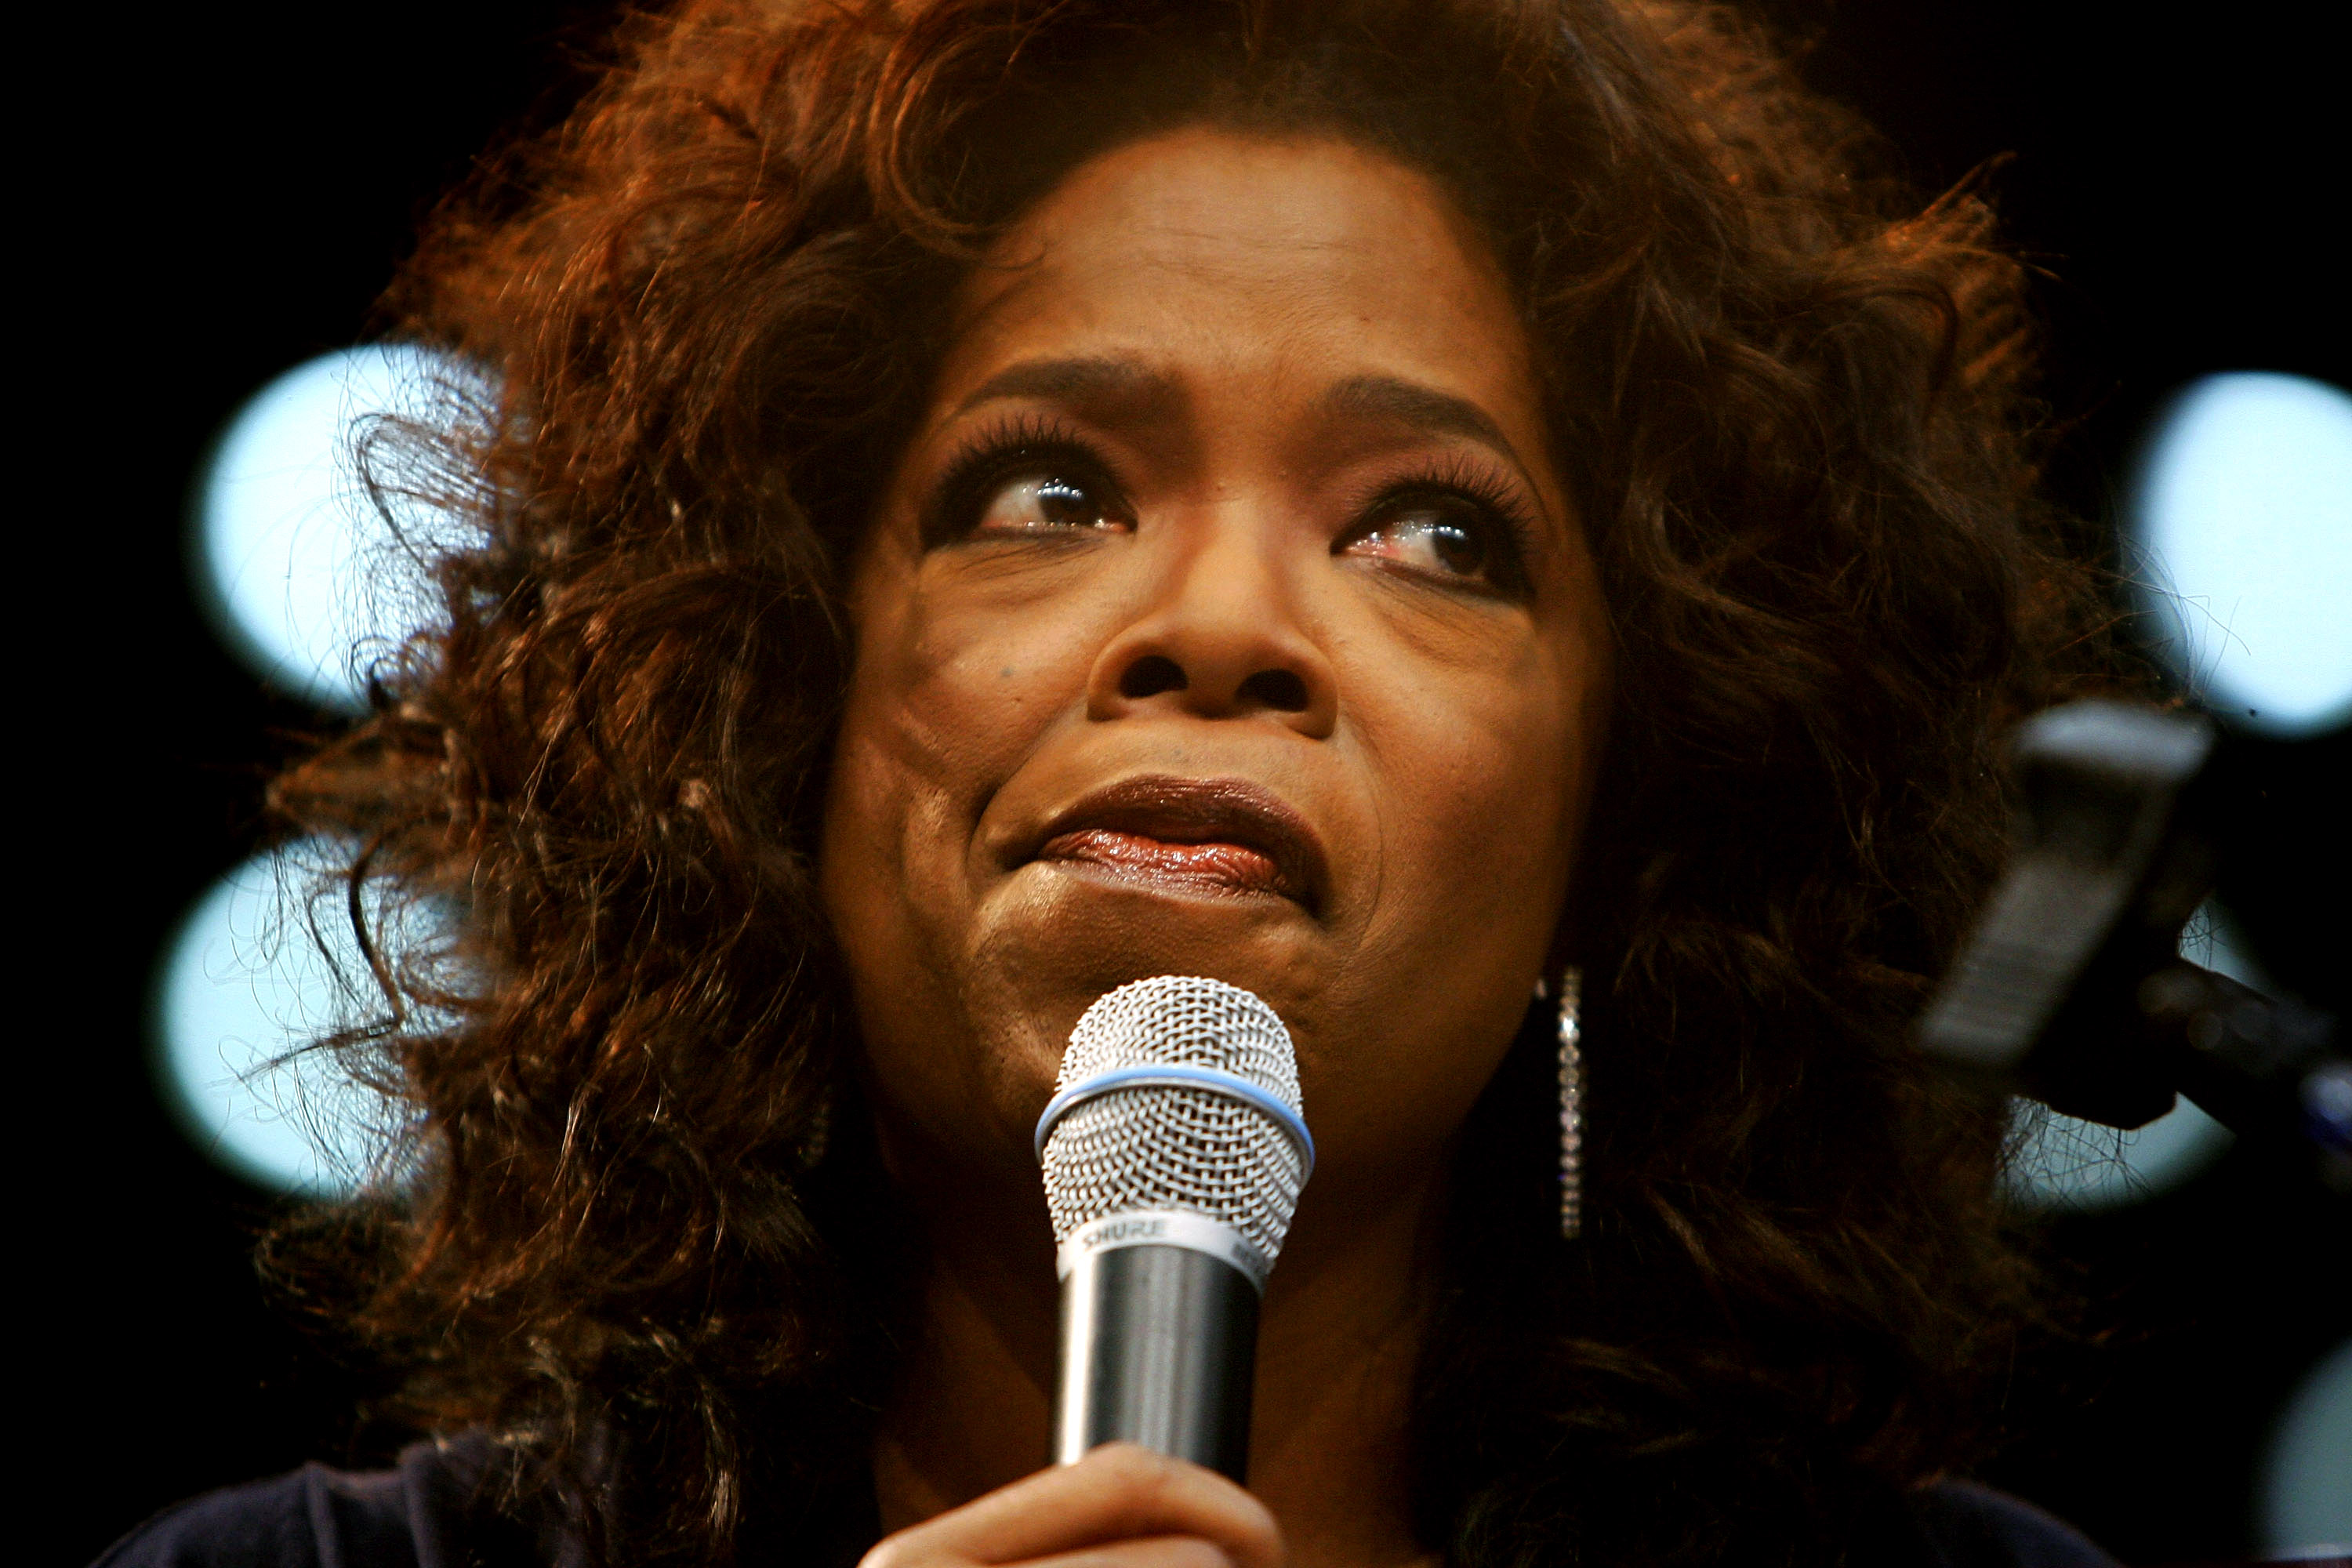 Oprah Winfrey at Michelle Obama's campaign rally in Los Angeles, 2007 | Source: Getty Images